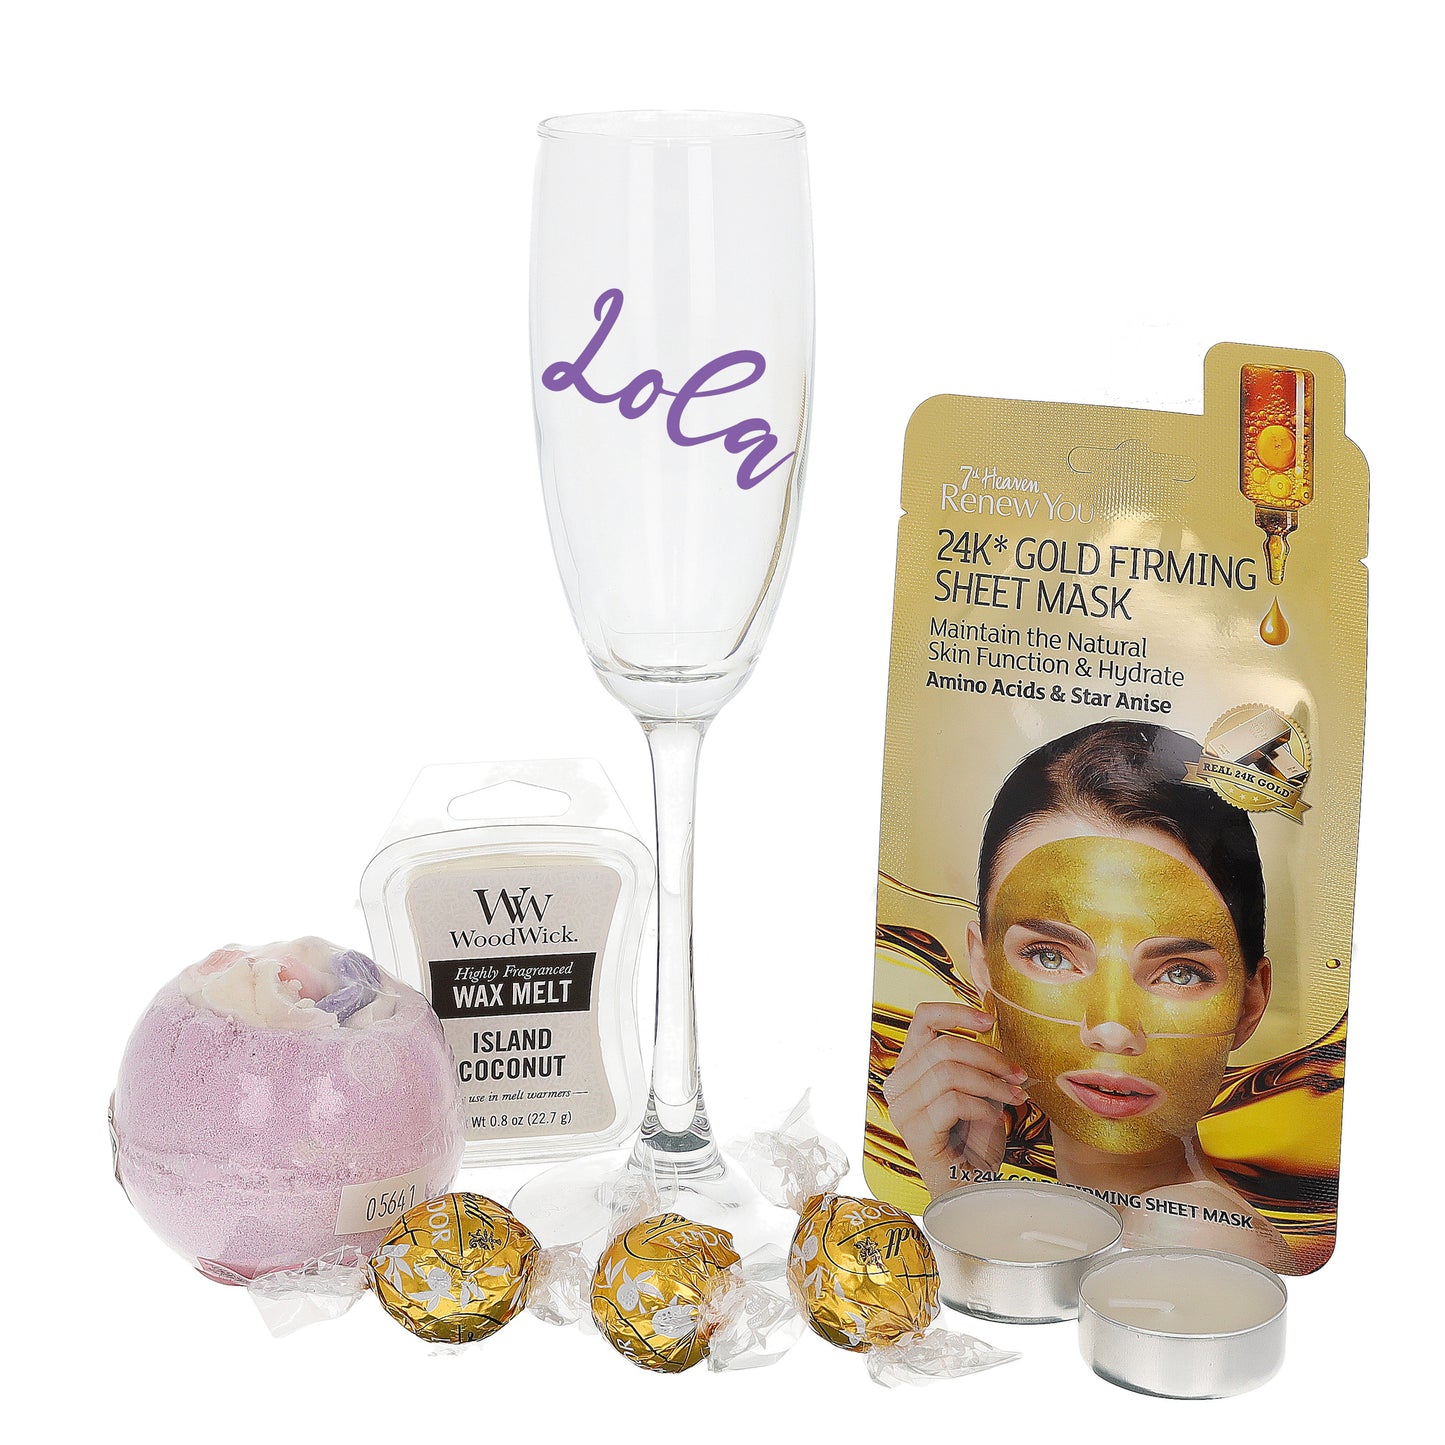 Personalised Prosecco / Champagne Glass Filled with Spa Pamper Gifts  - Always Looking Good -   